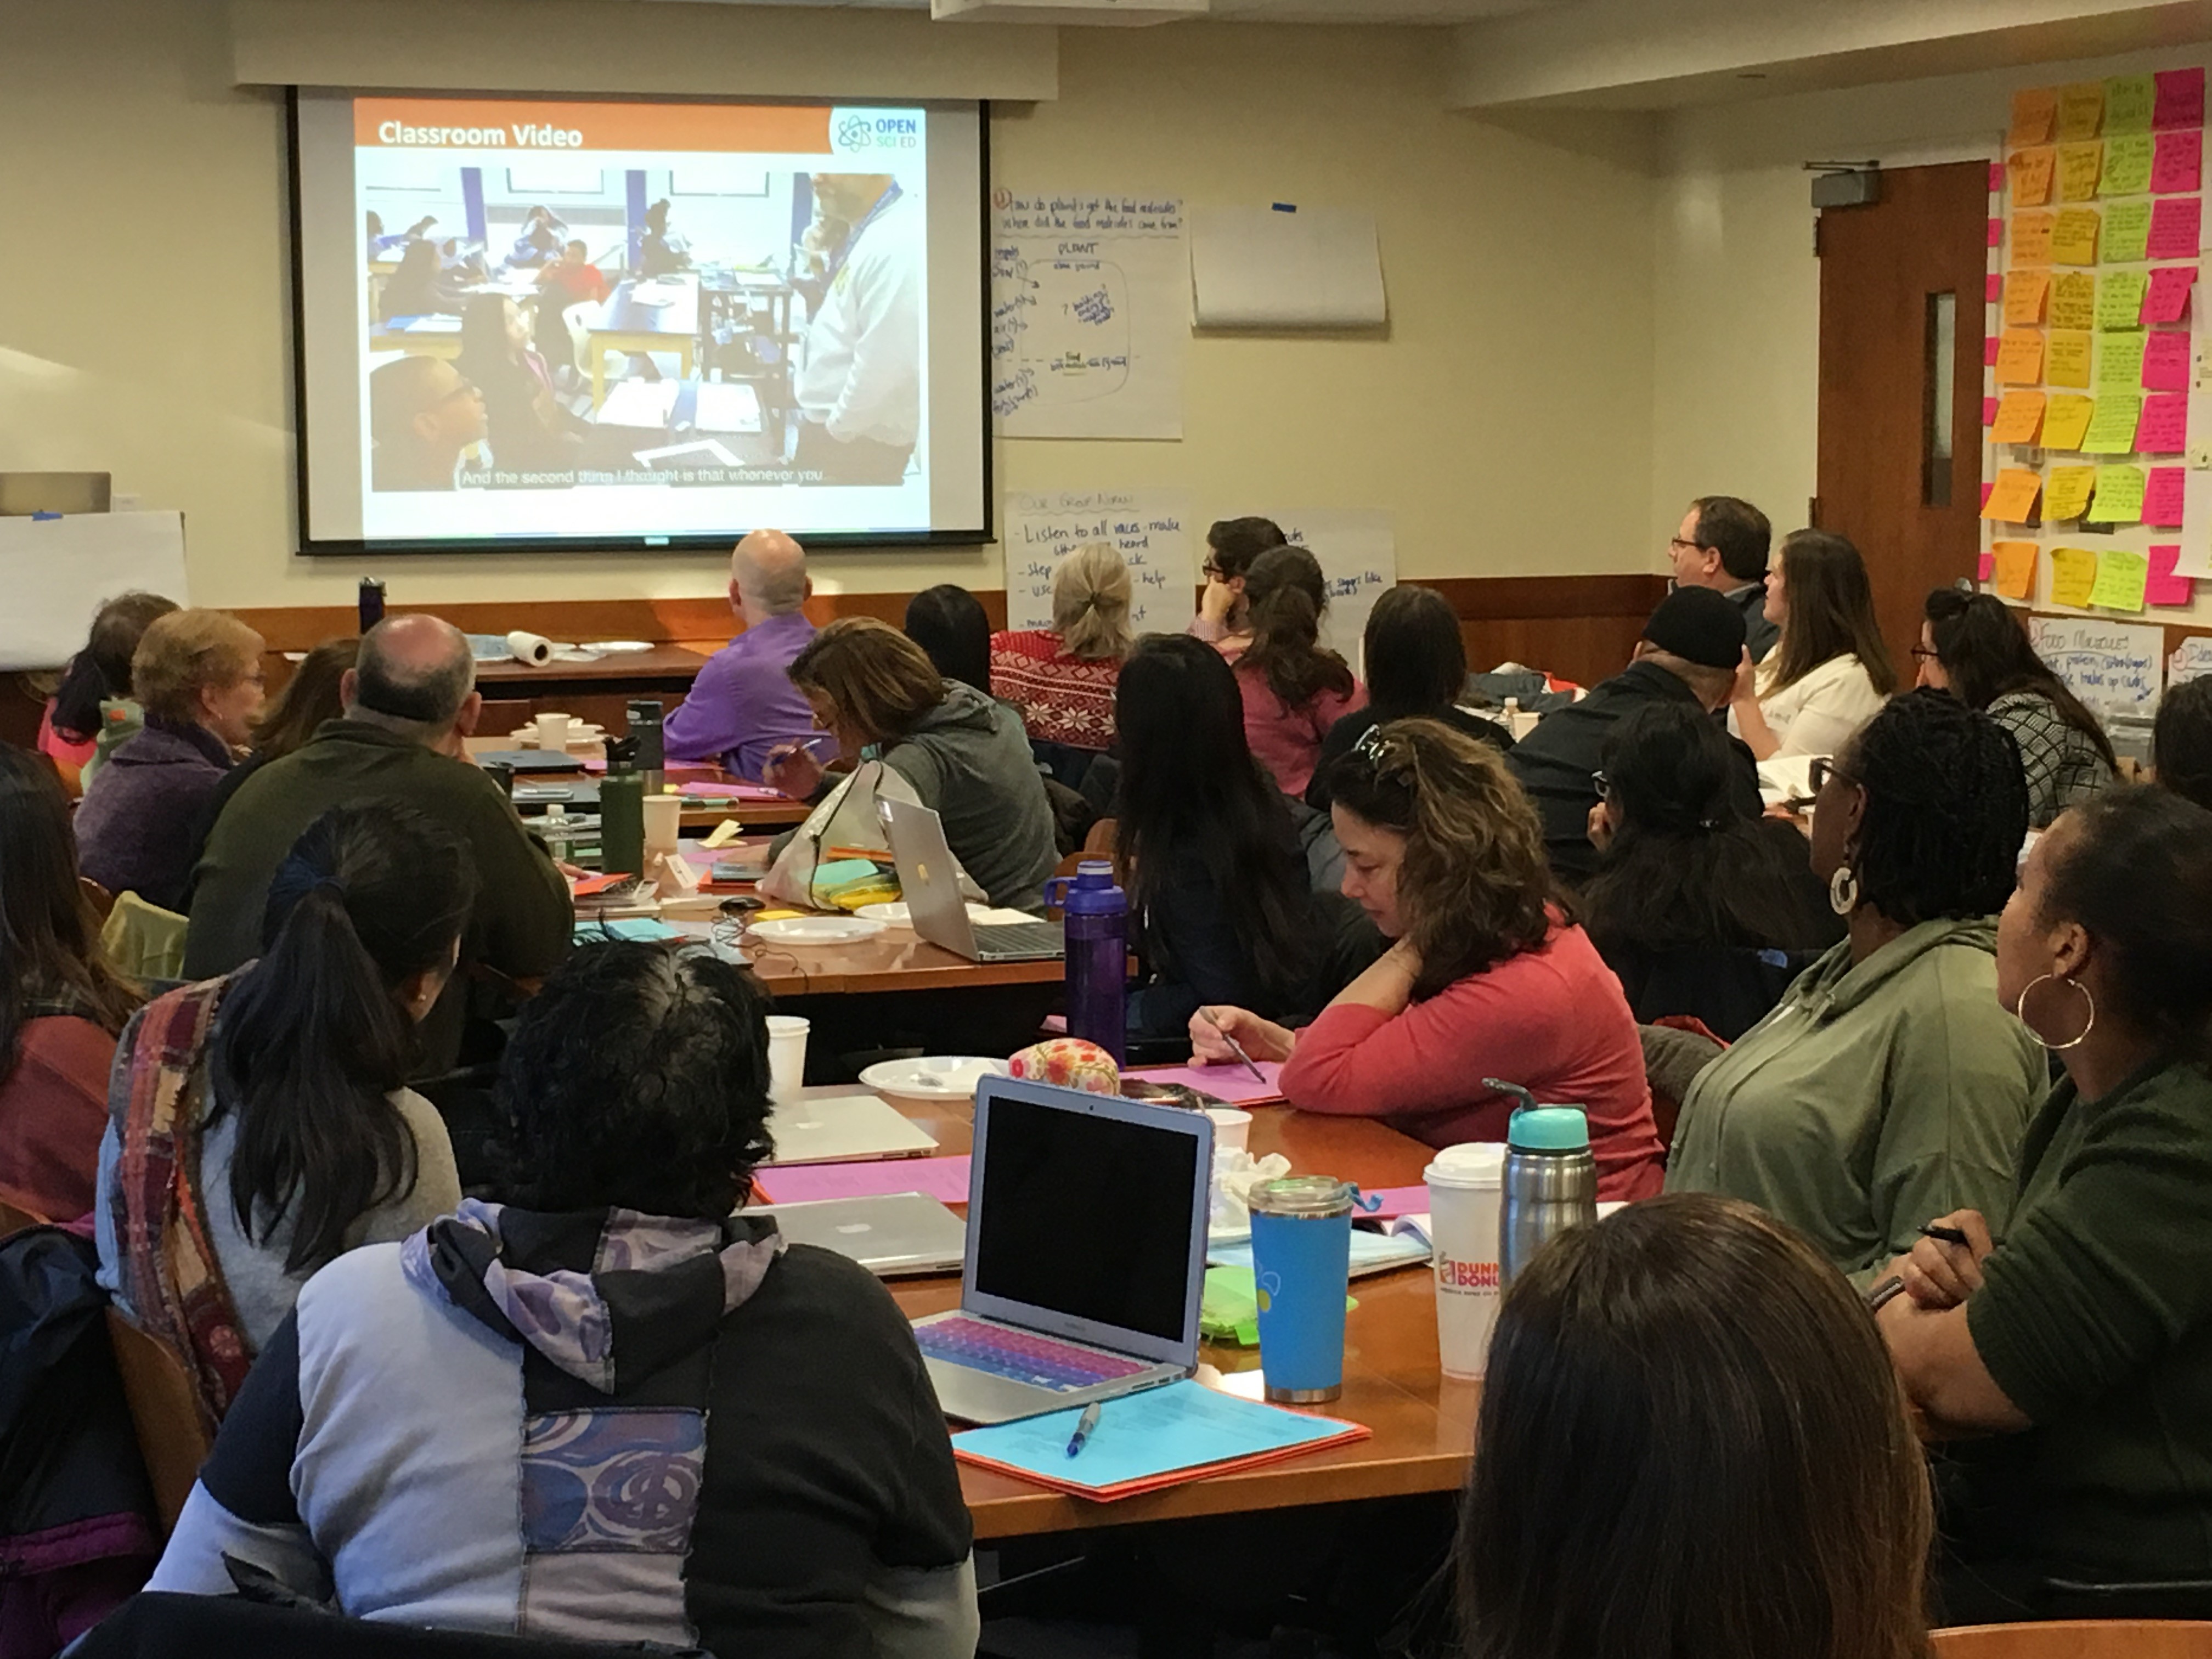 Teachers in a PD workshop examine a classroom video to reflect on key instructional elements. Photo courtesy of the author.